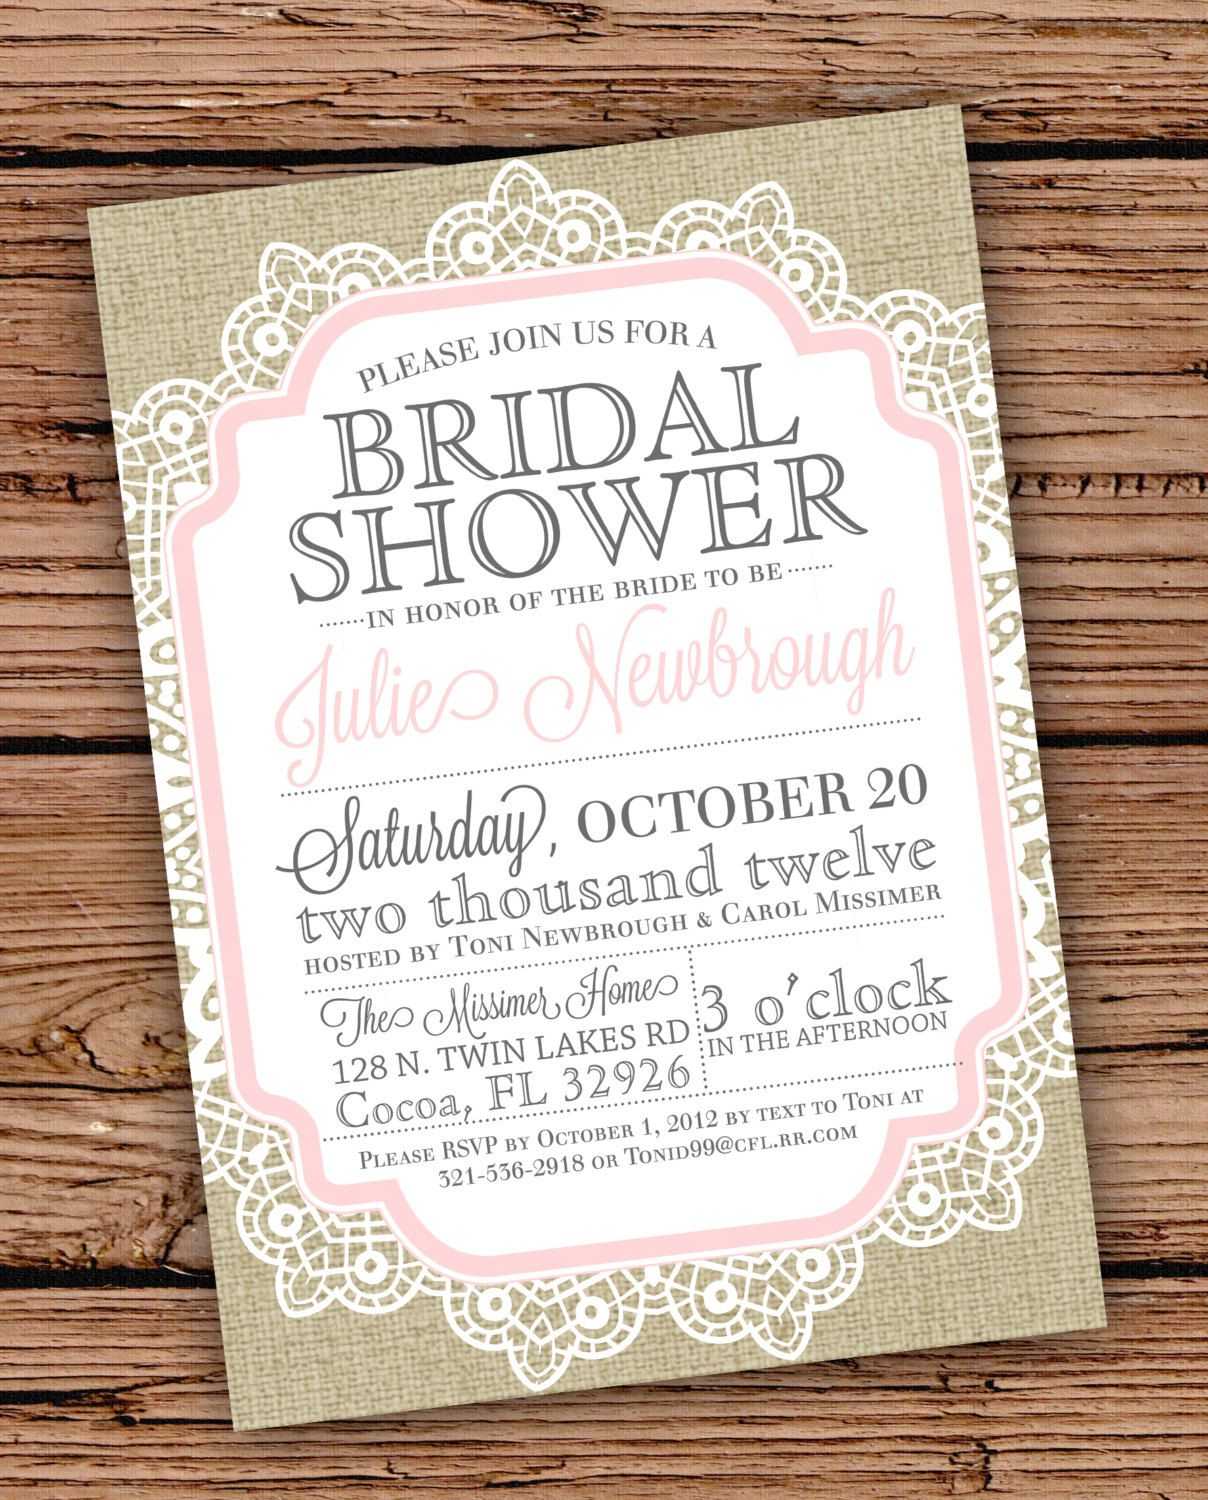 Diy Wedding Shower Invitations : Diy Bridal Shower In Michaels Place Card Template